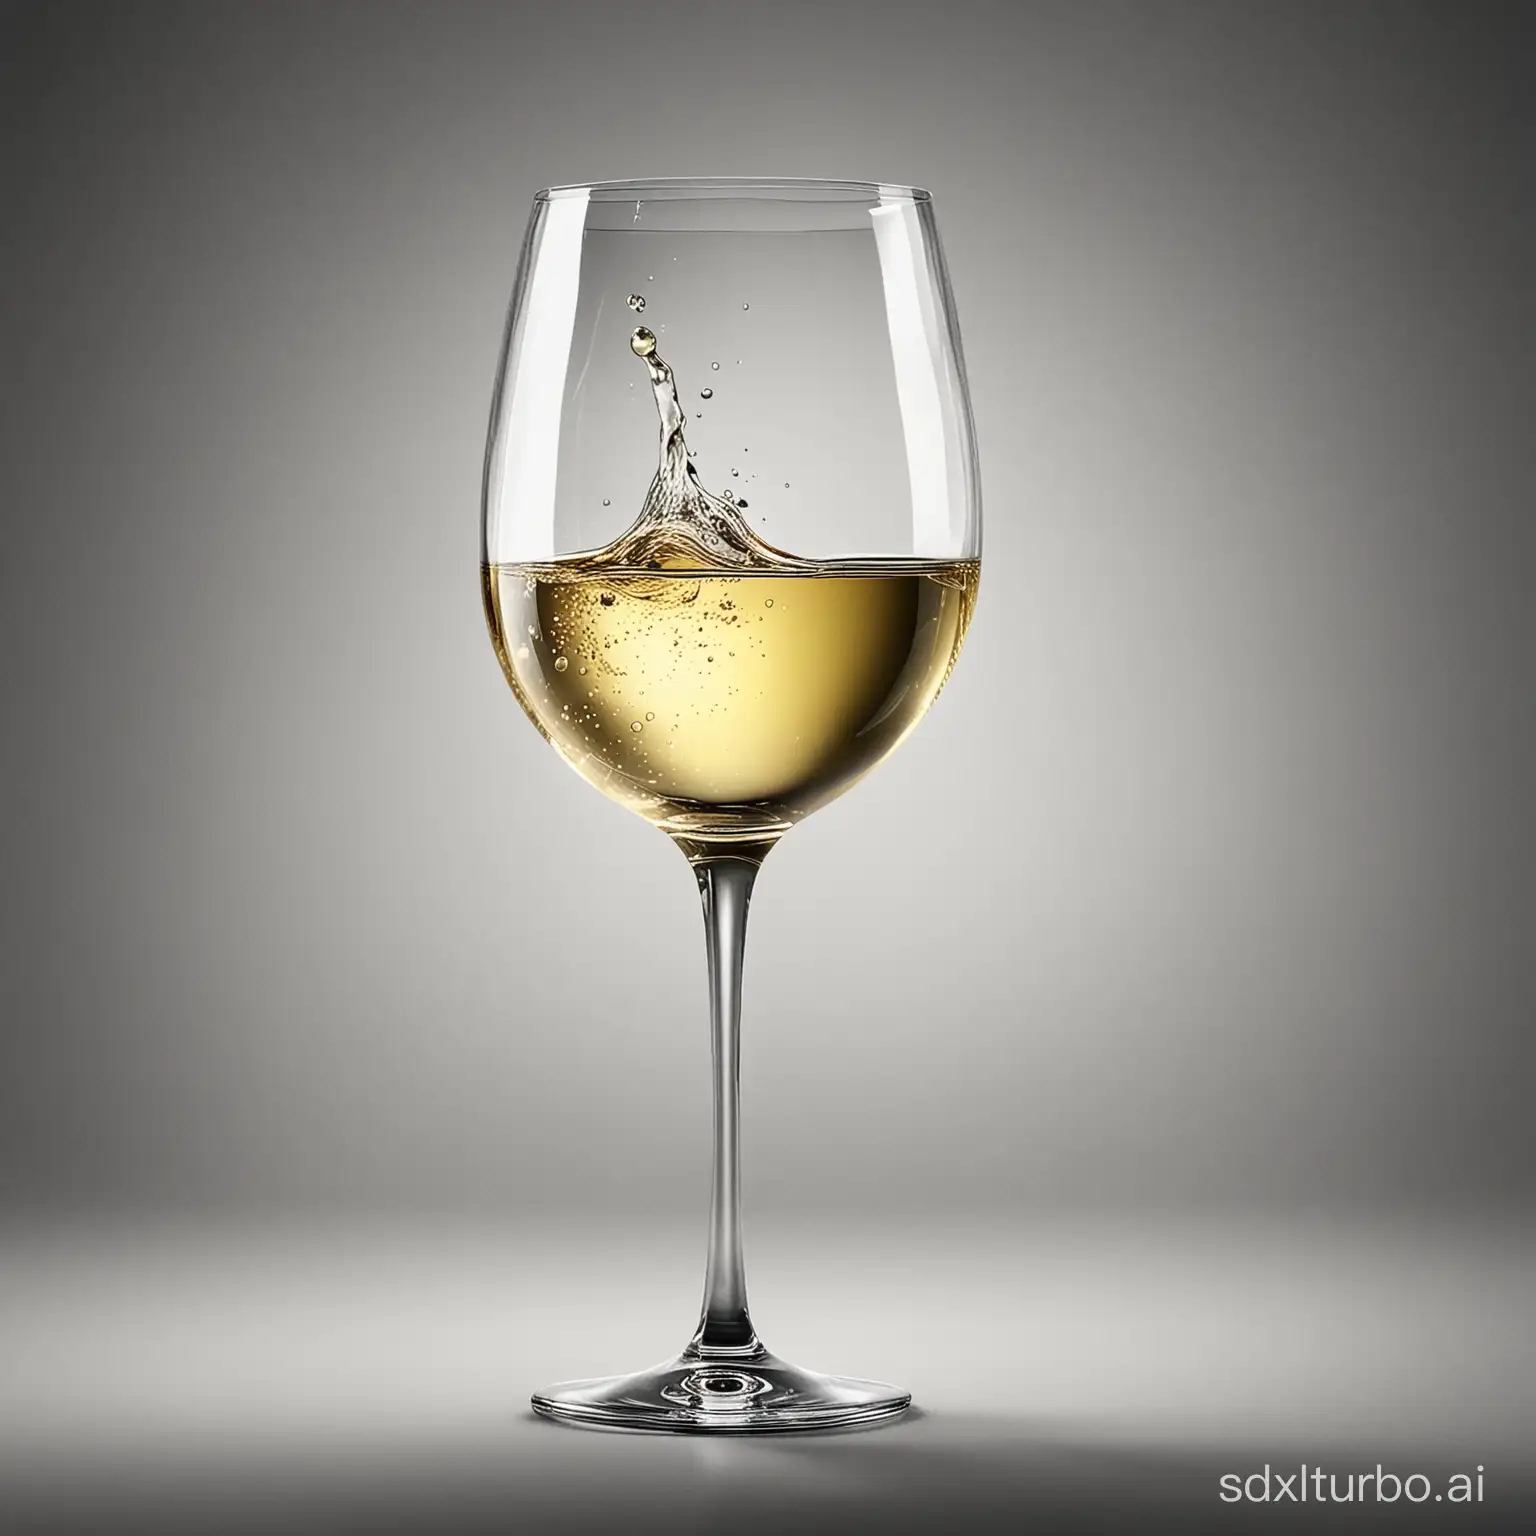 Draw a fashionable poster of a wine glass, with white wine in the glass, requesting luxury, grandeur, and high-end.